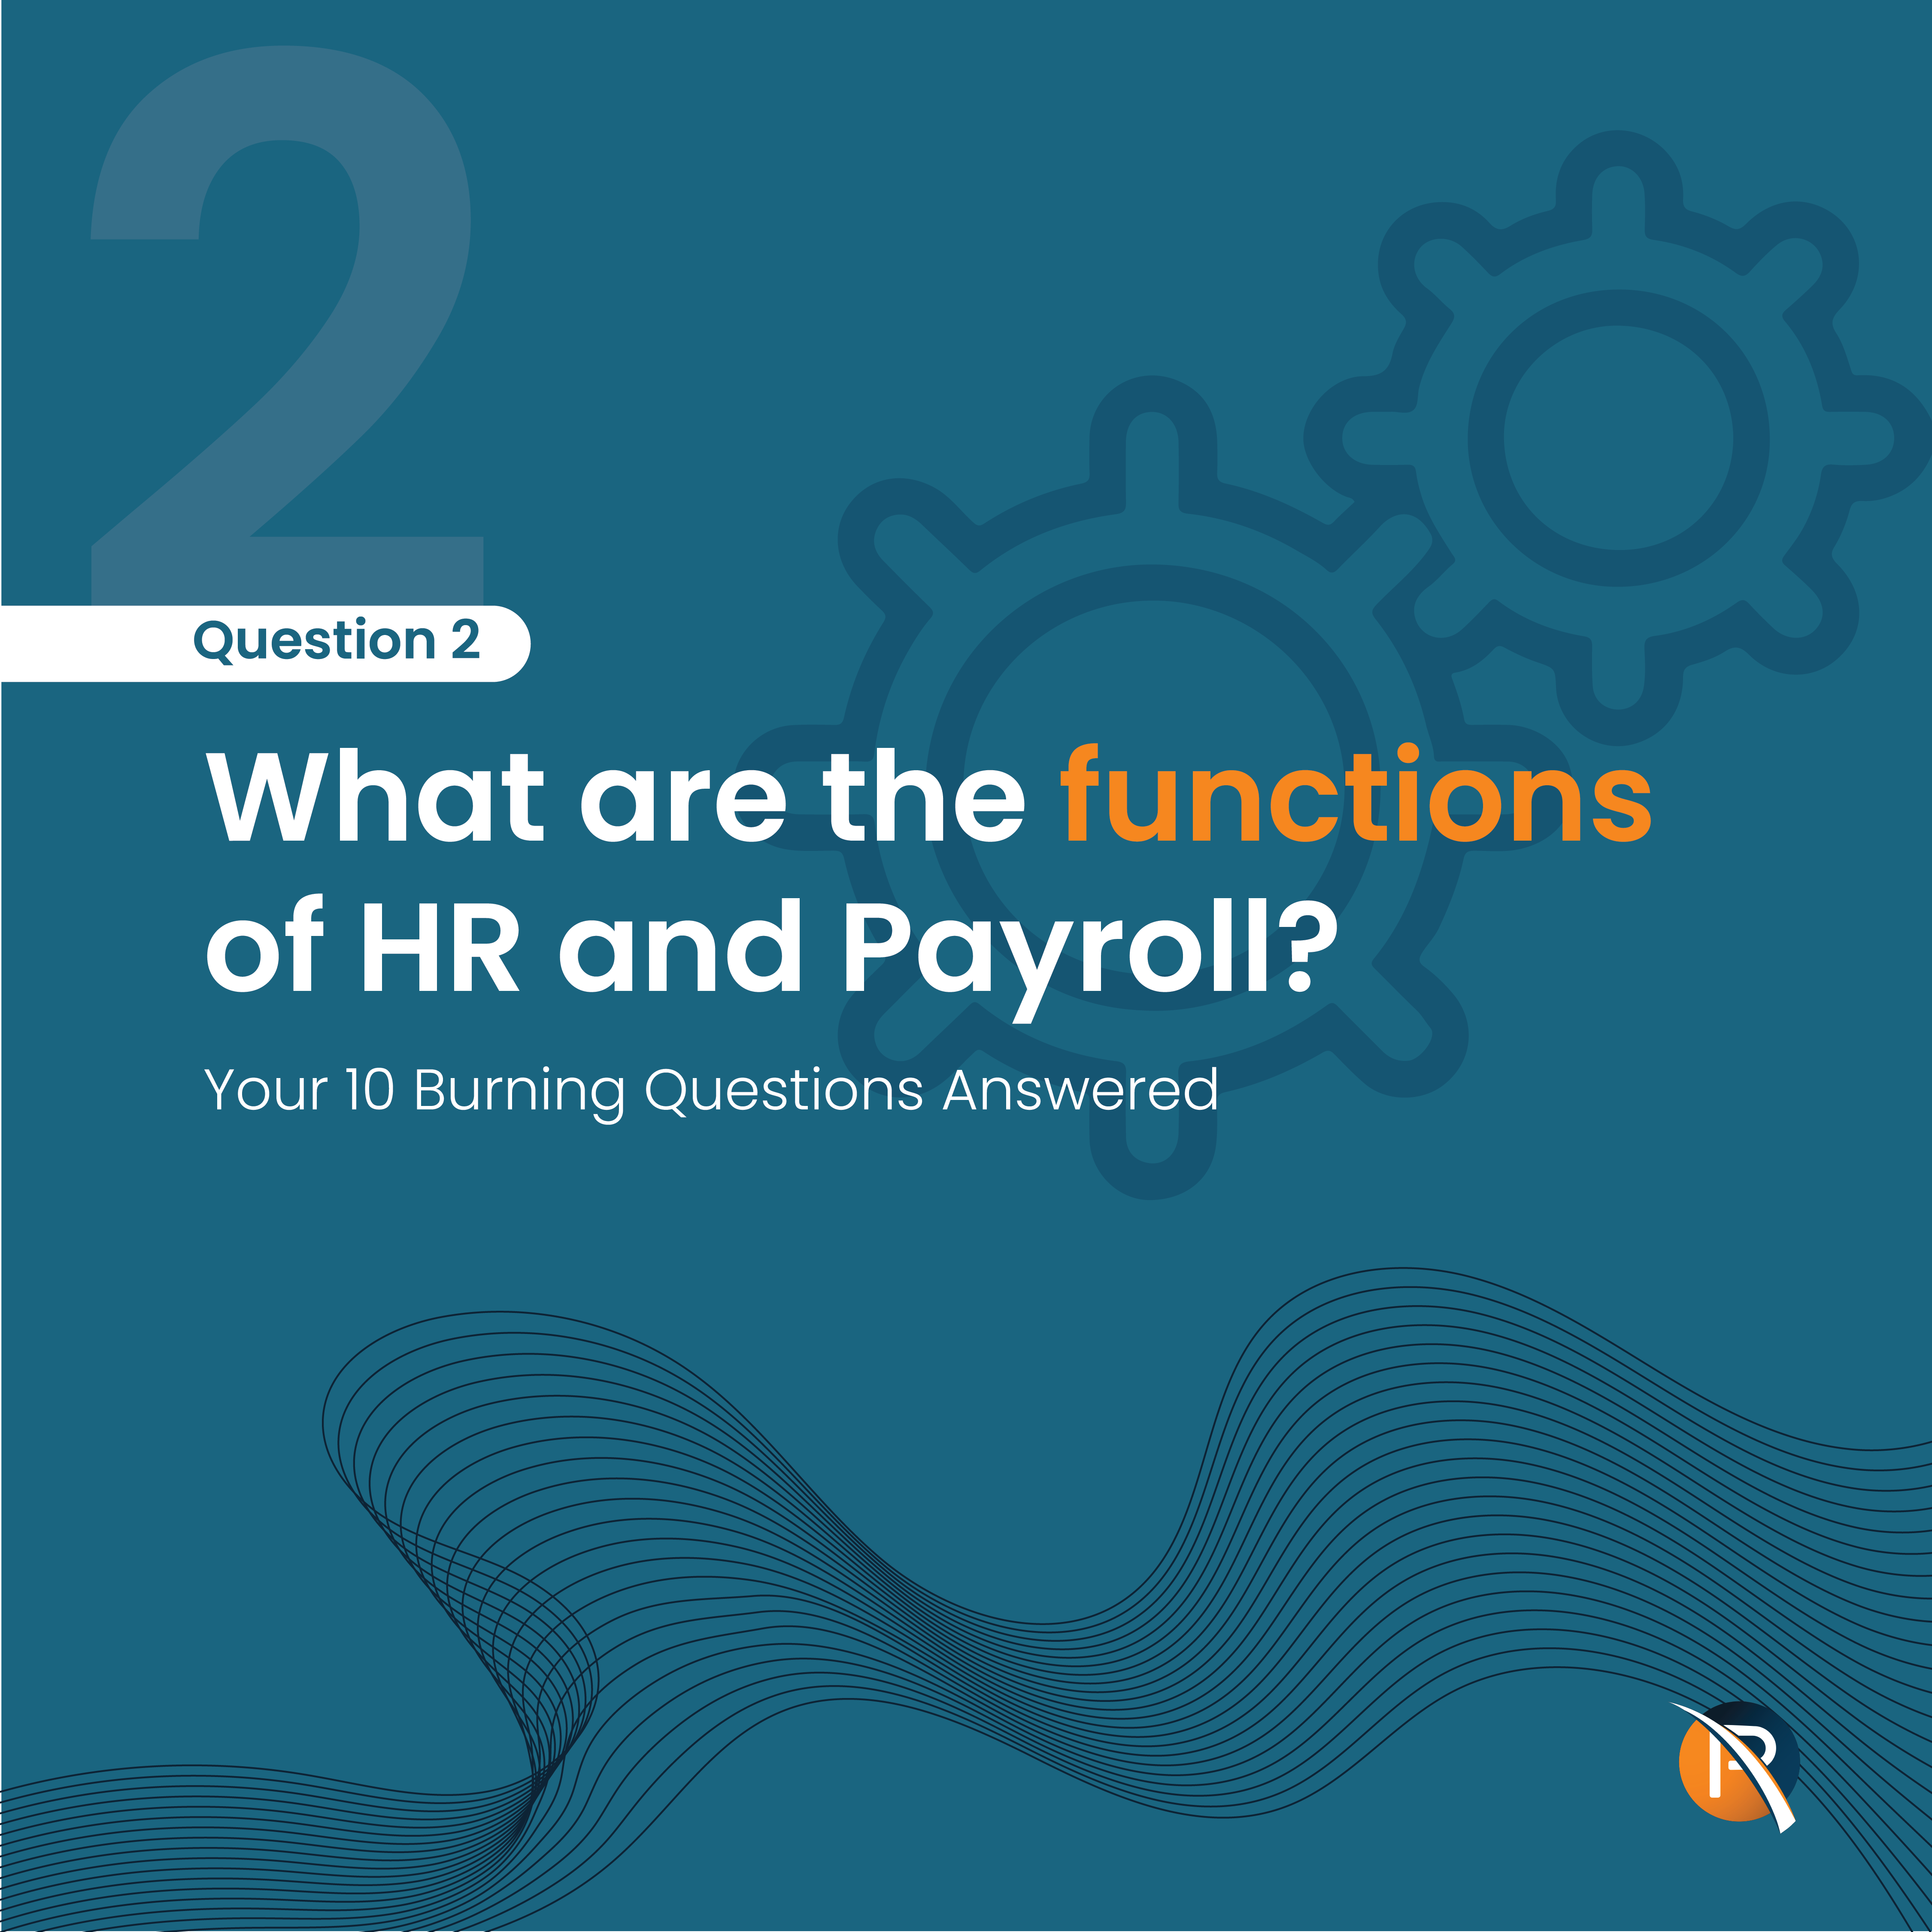 The functions of HR & Payroll